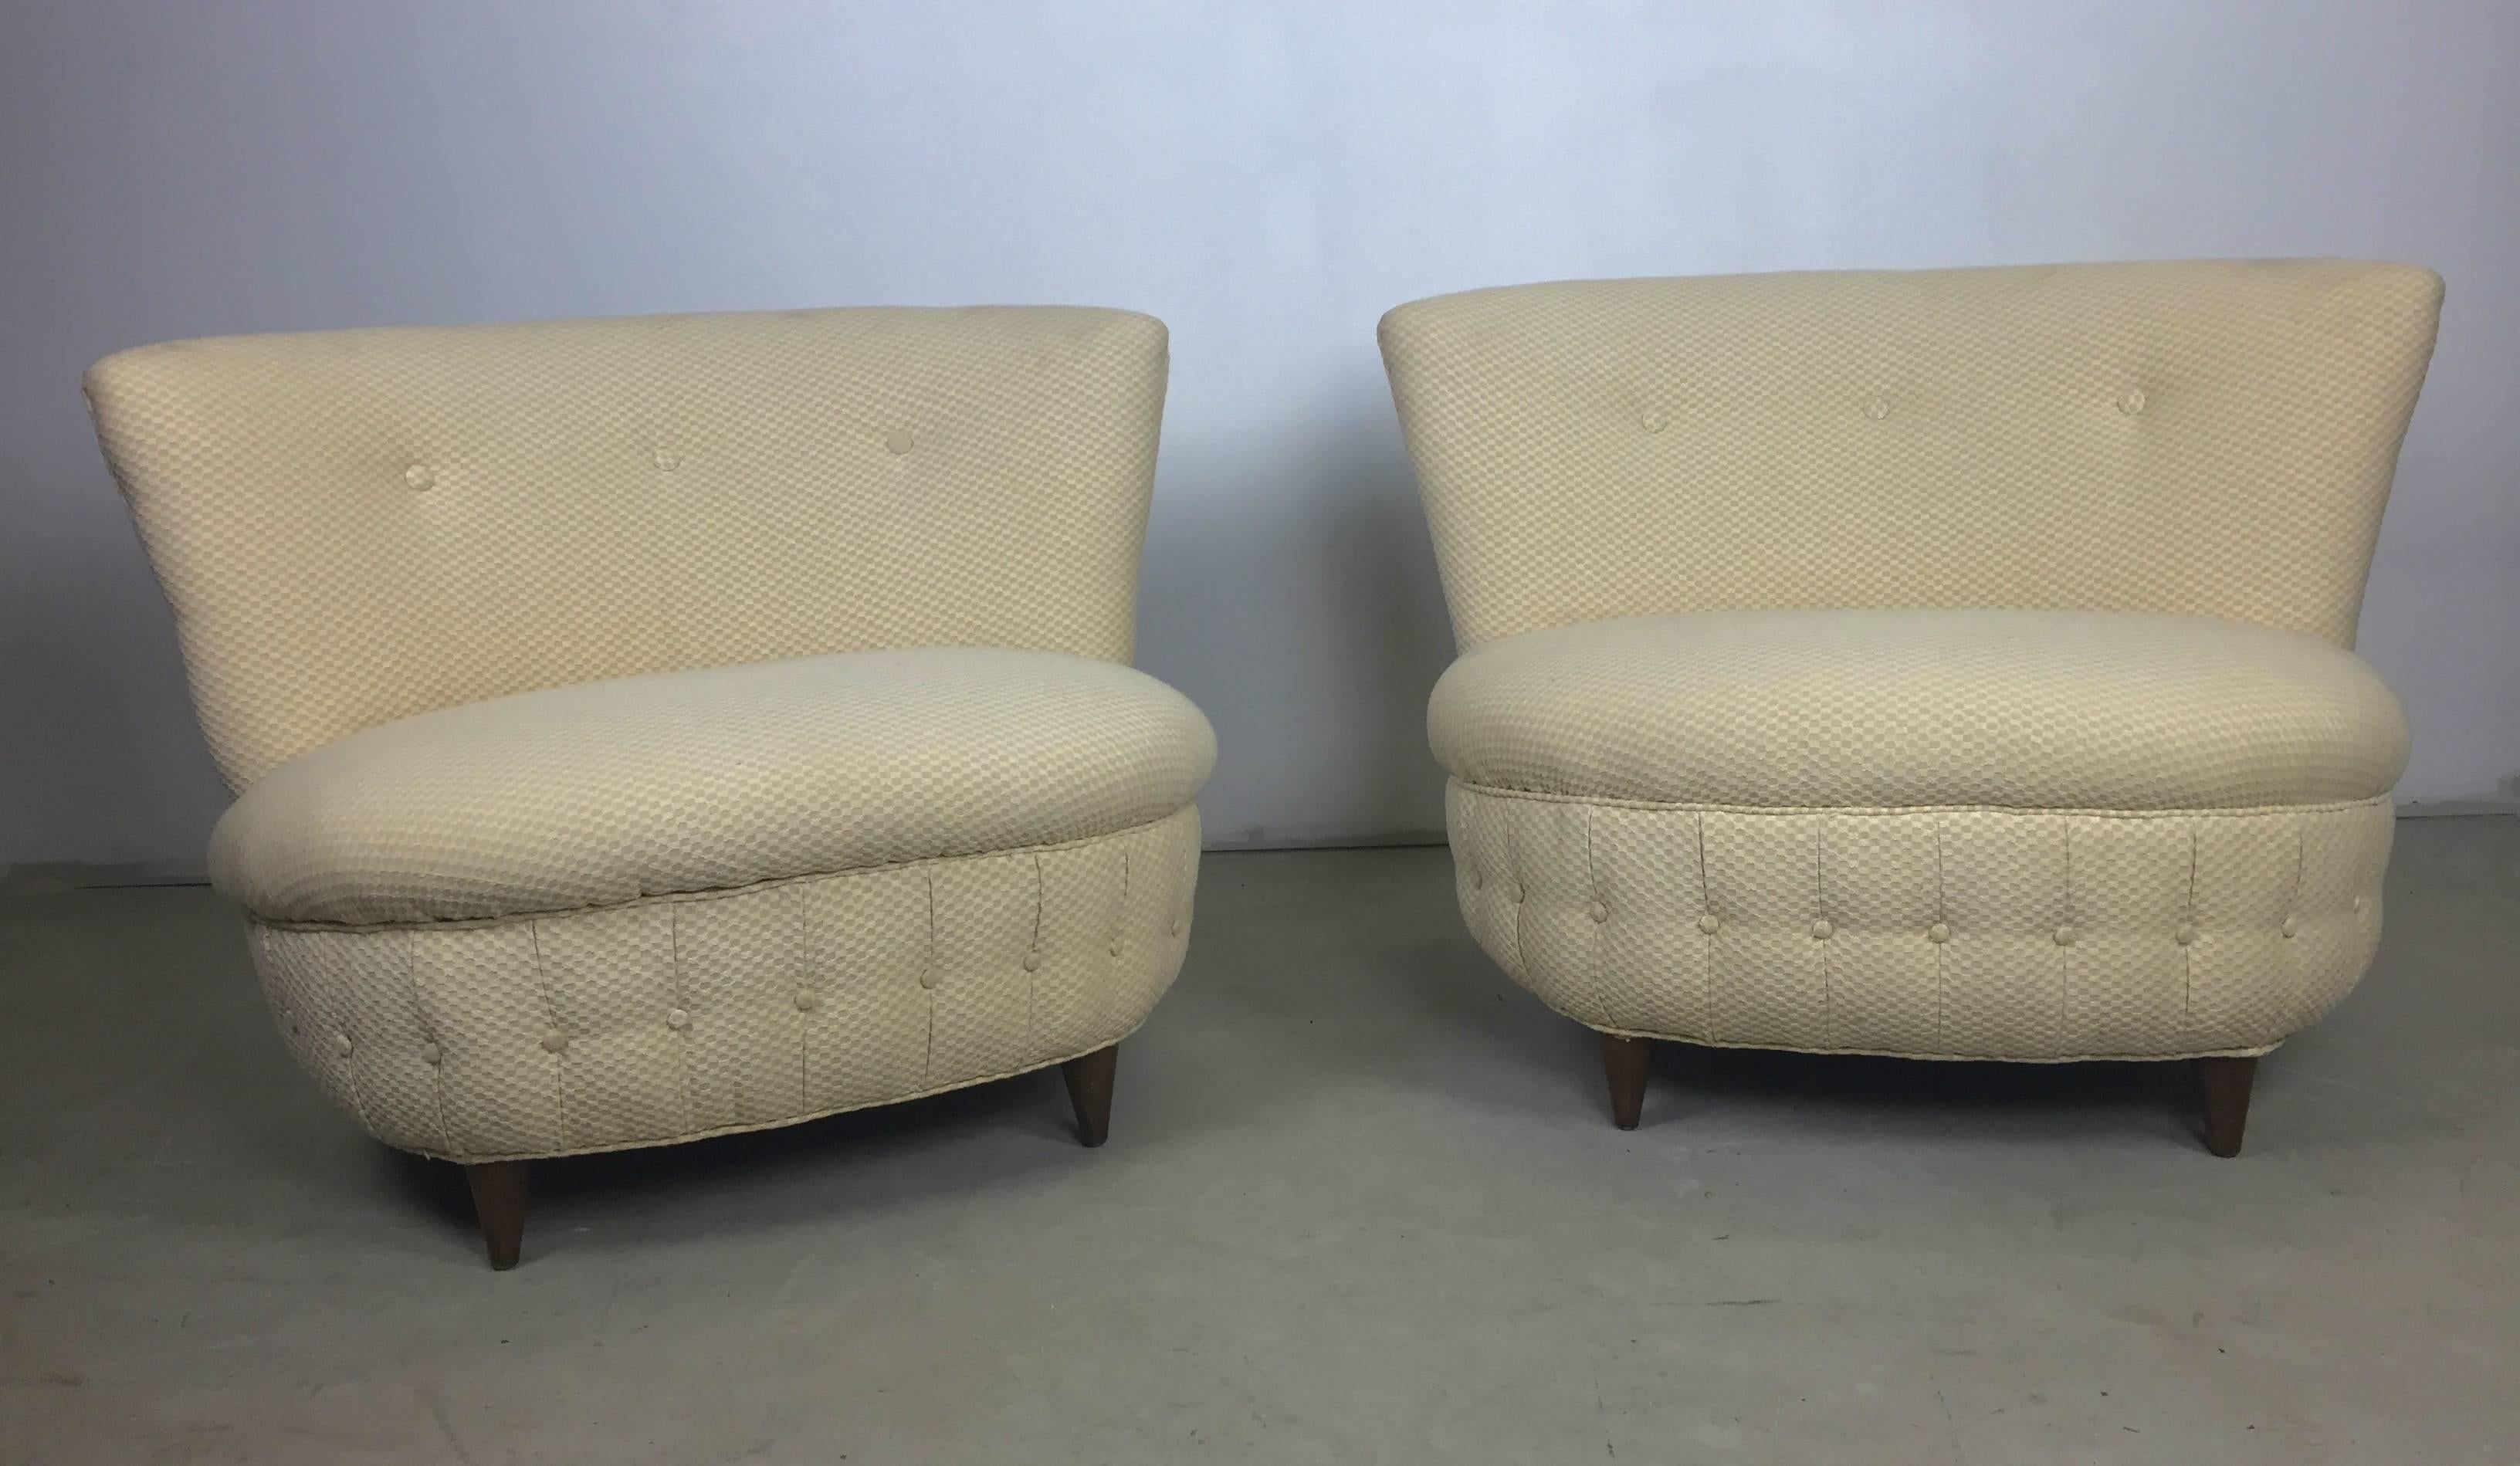 Pair of Button Tufted Slipper Chairs by Gilbert Rohde In Good Condition For Sale In Asbury Park, NJ